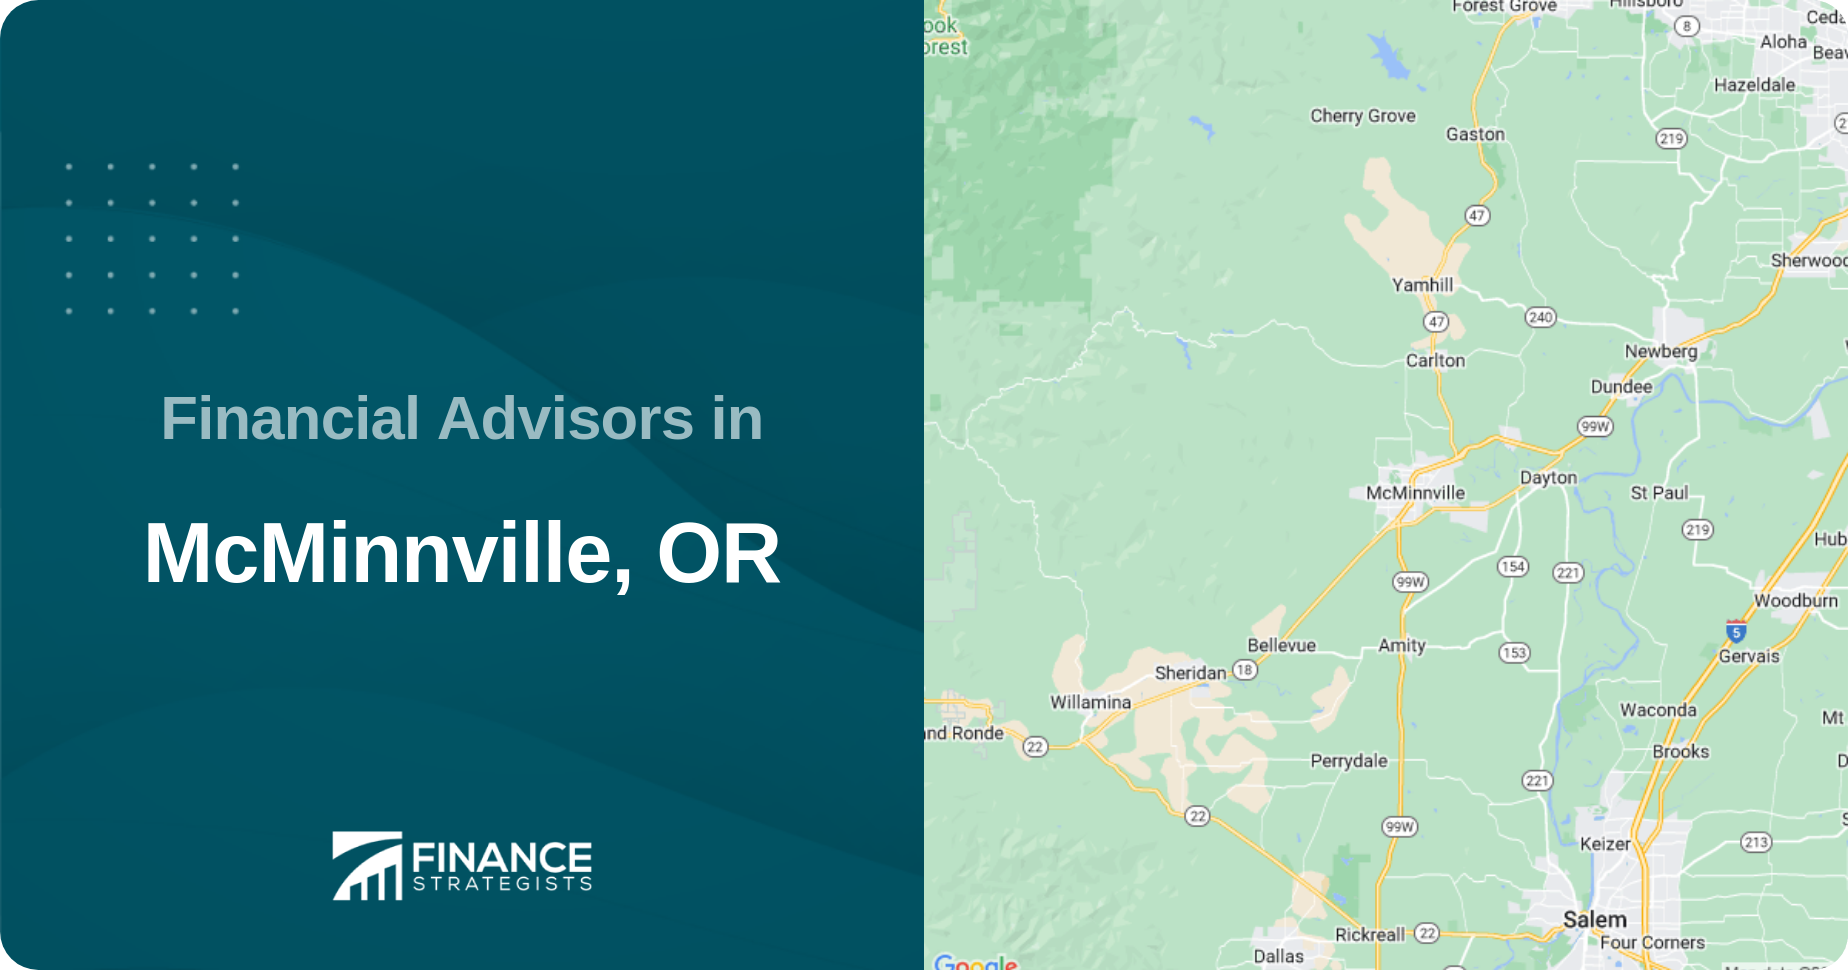 Financial Advisors in McMinnville, OR